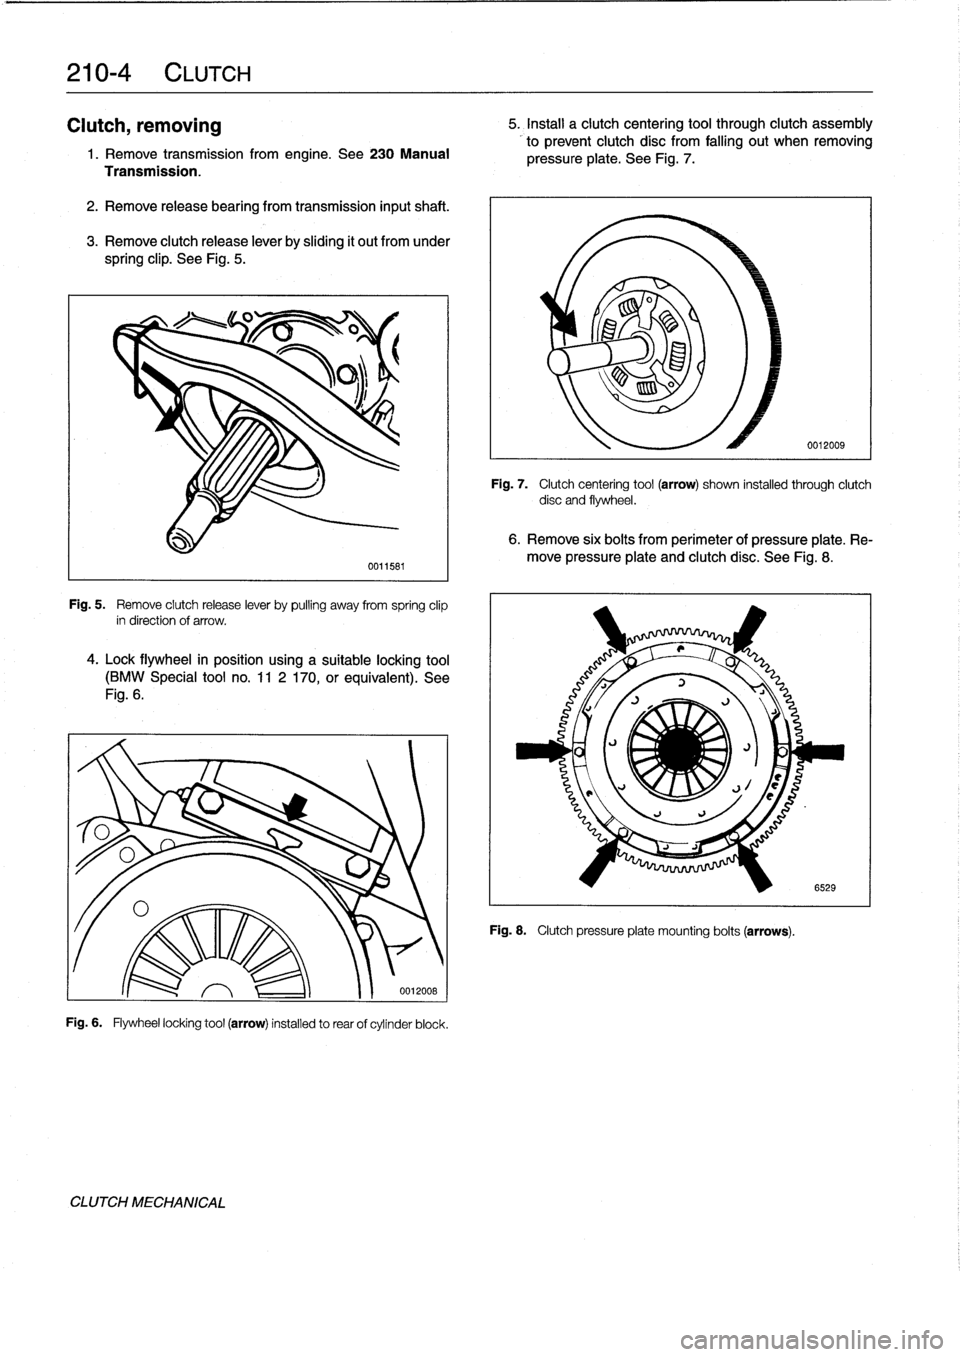 BMW 318i 1997 E36 User Guide 
210-
4
CLUTCH

Clutch,
removing

1
.
Remove
transmission
fromengine
.
See230
Manual

Transmission
.

2
.
Remove
release
bearing
from
transmission
inputshaft
.

3
.
Remove
clutch
release
lever
by
slid